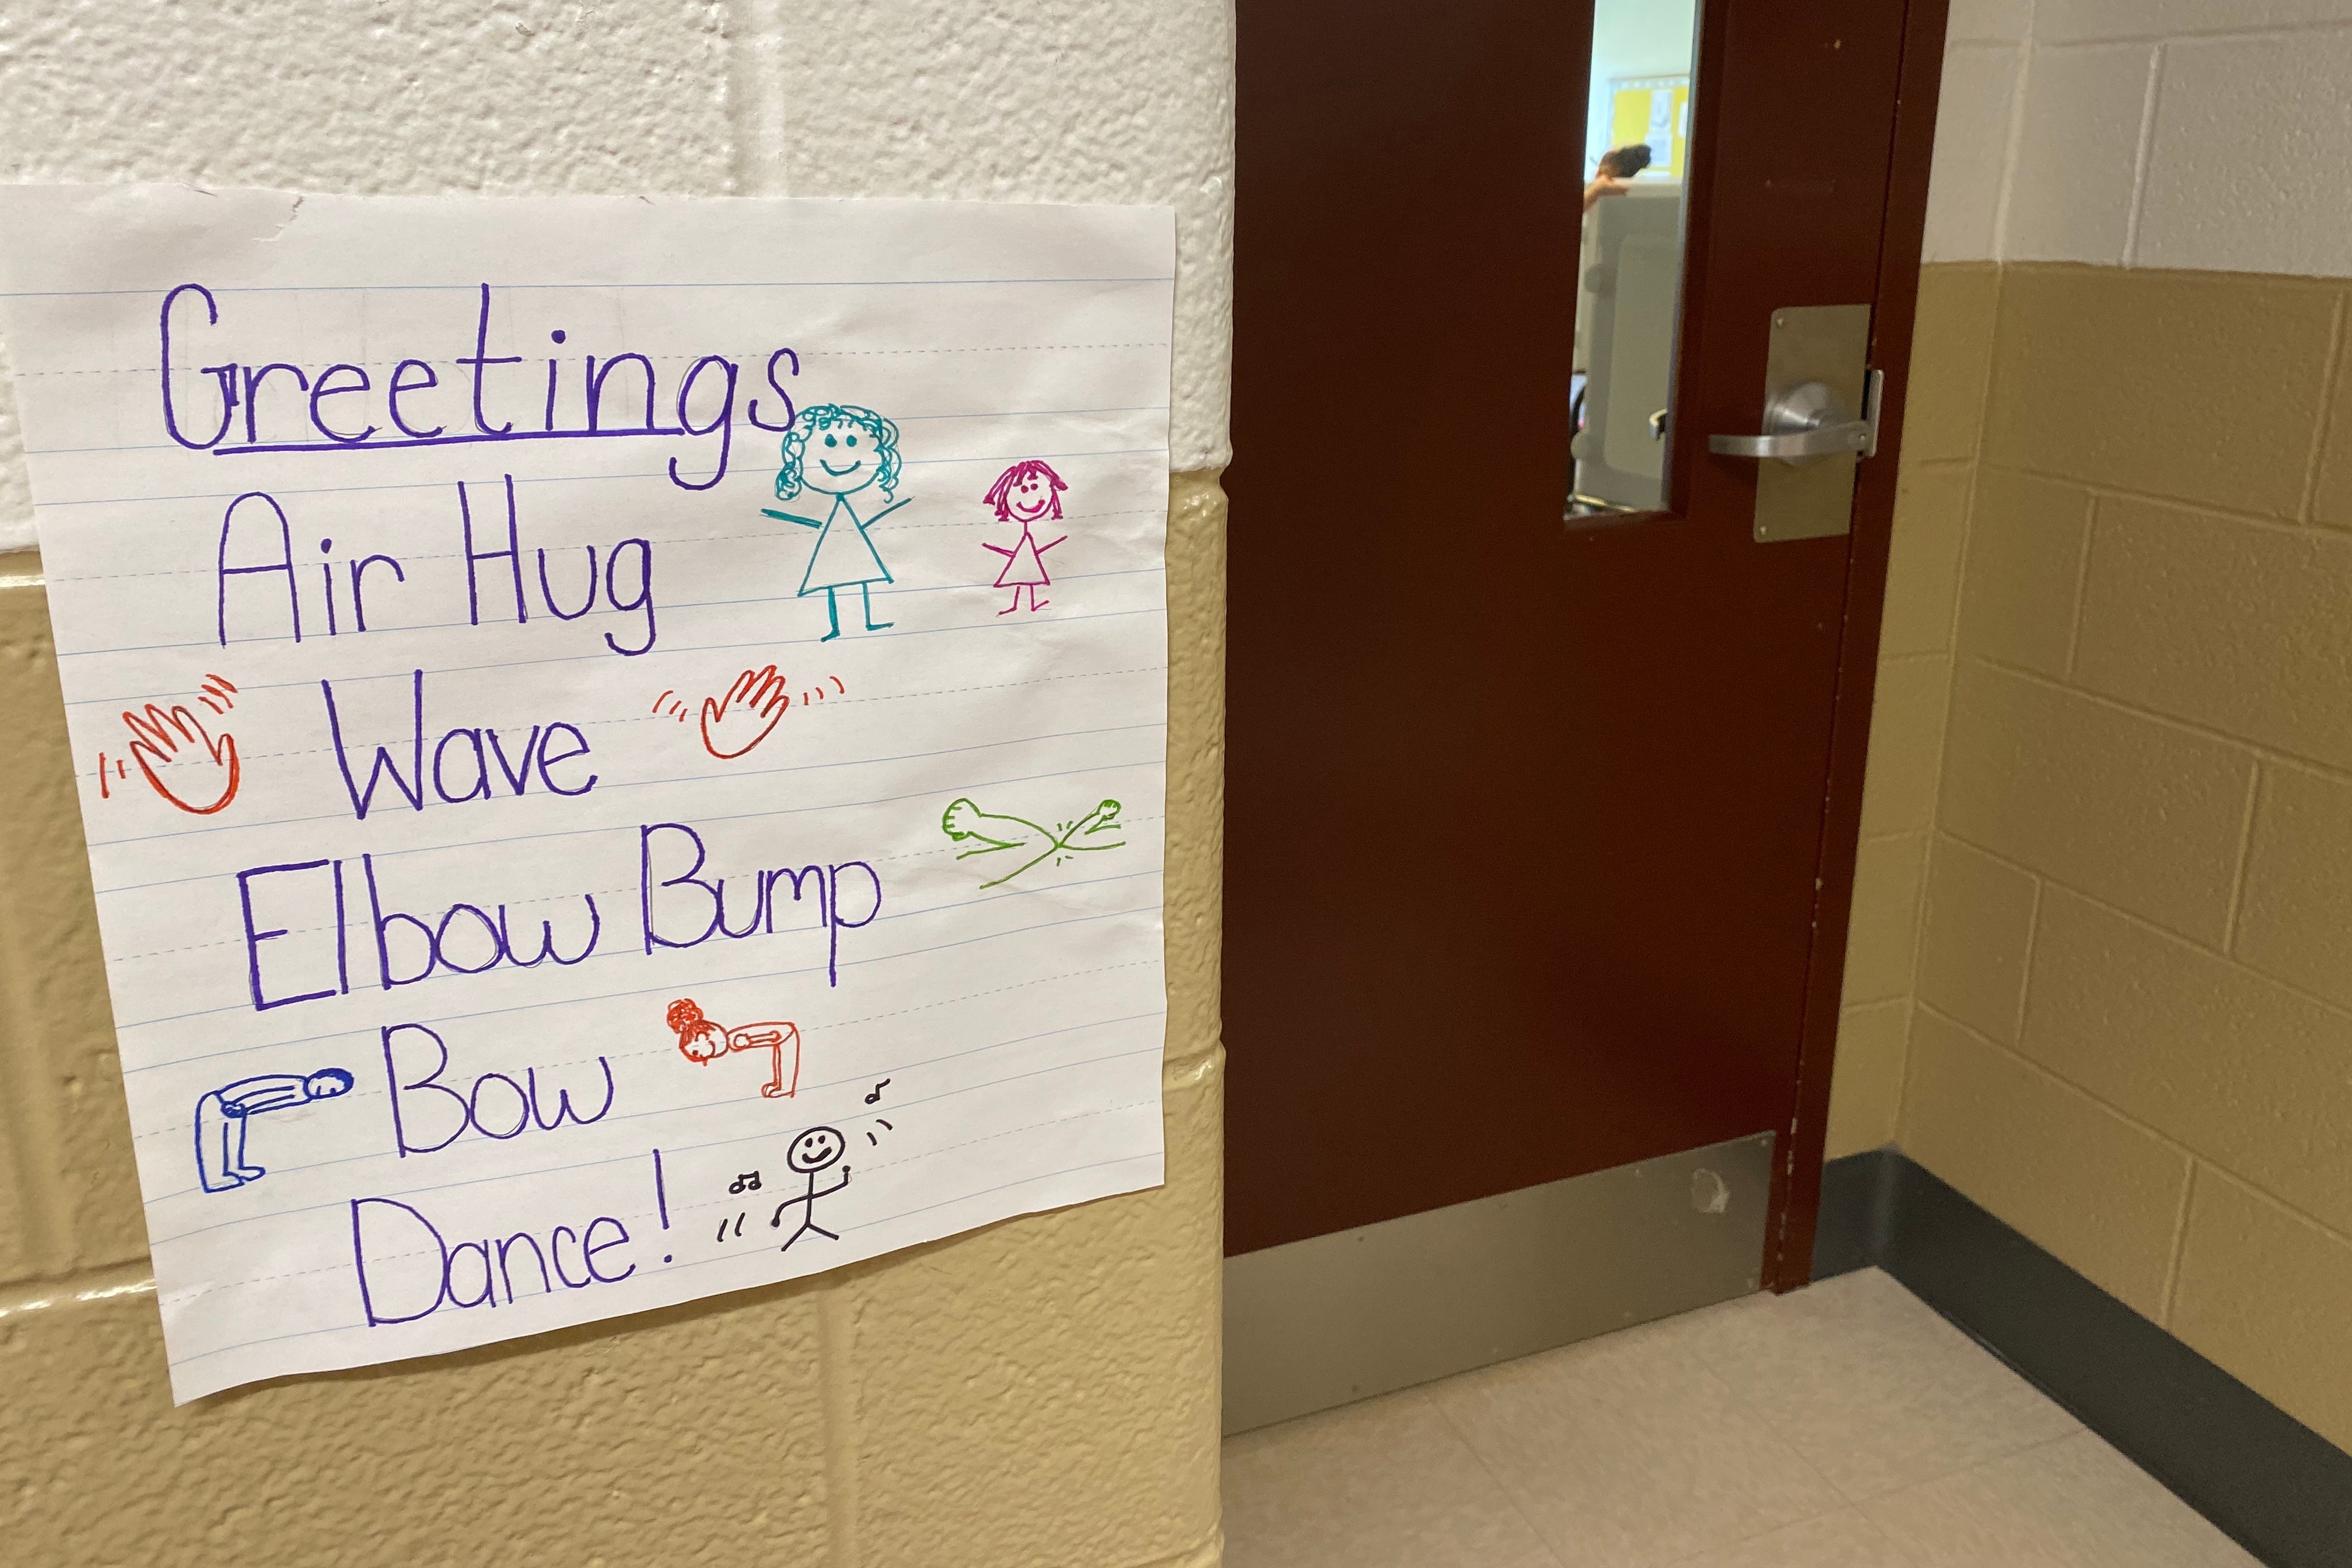 A sign in a hallway by a door at Tindley Summit Academy in Indianapolis says “Air hug, wave, elbow bump, bow, dance” 